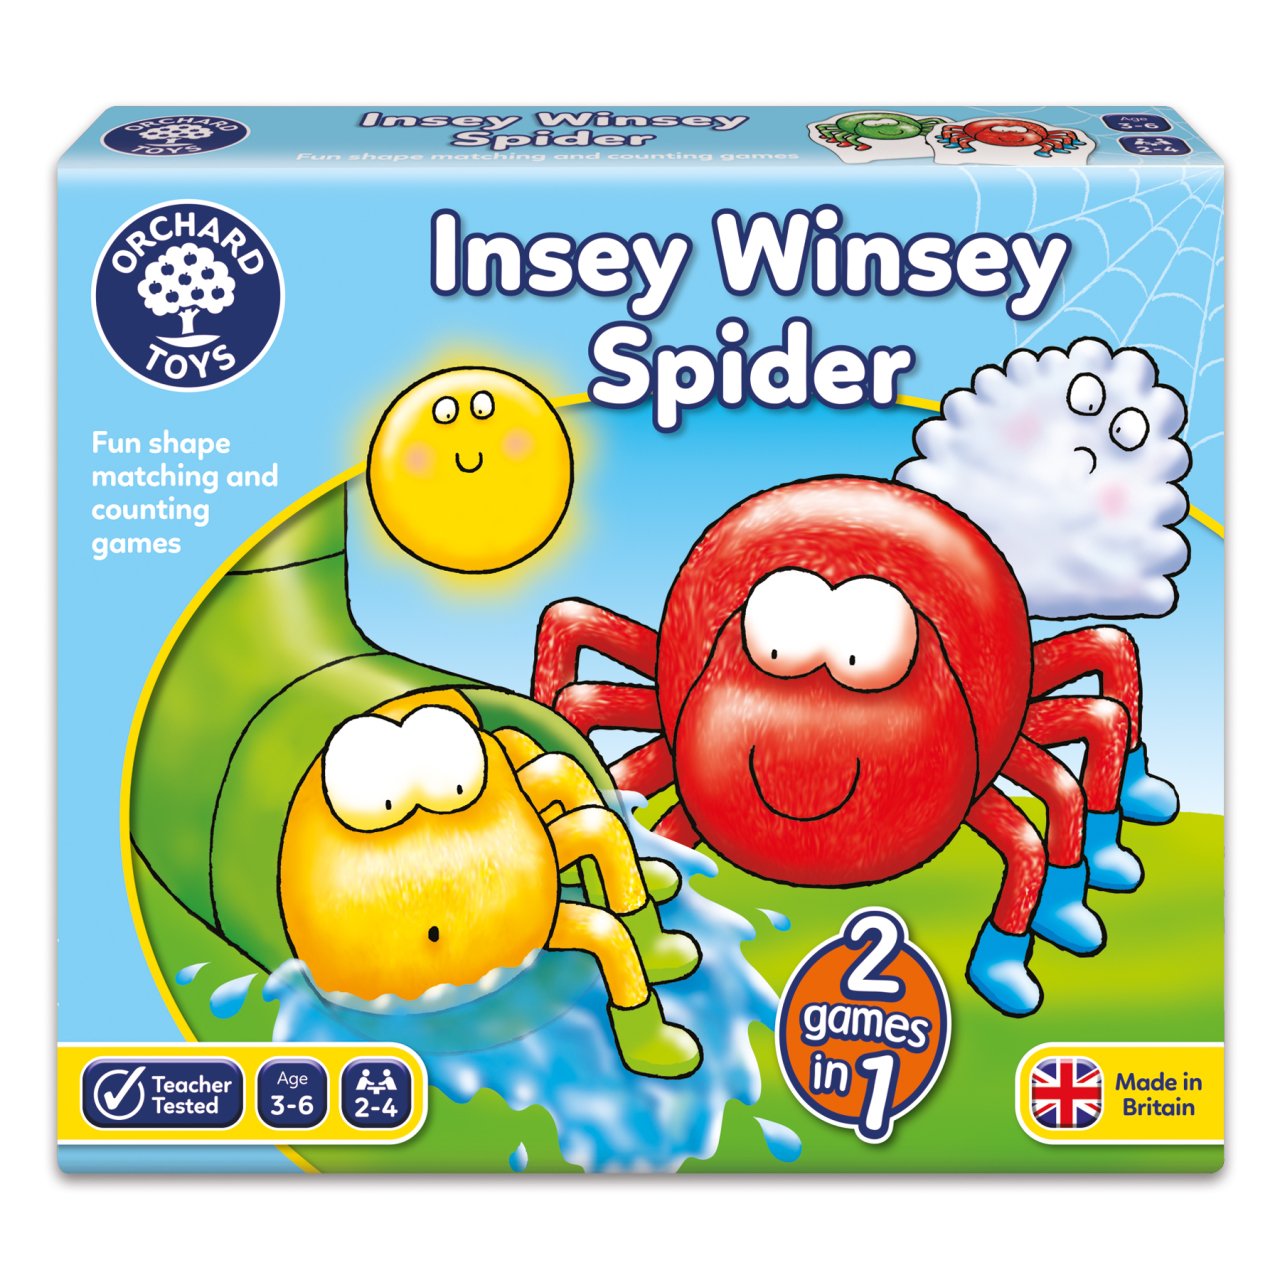 ORCHARD TOYS Orchard Toys İnsey Winsey Spider 3-6 Yaş